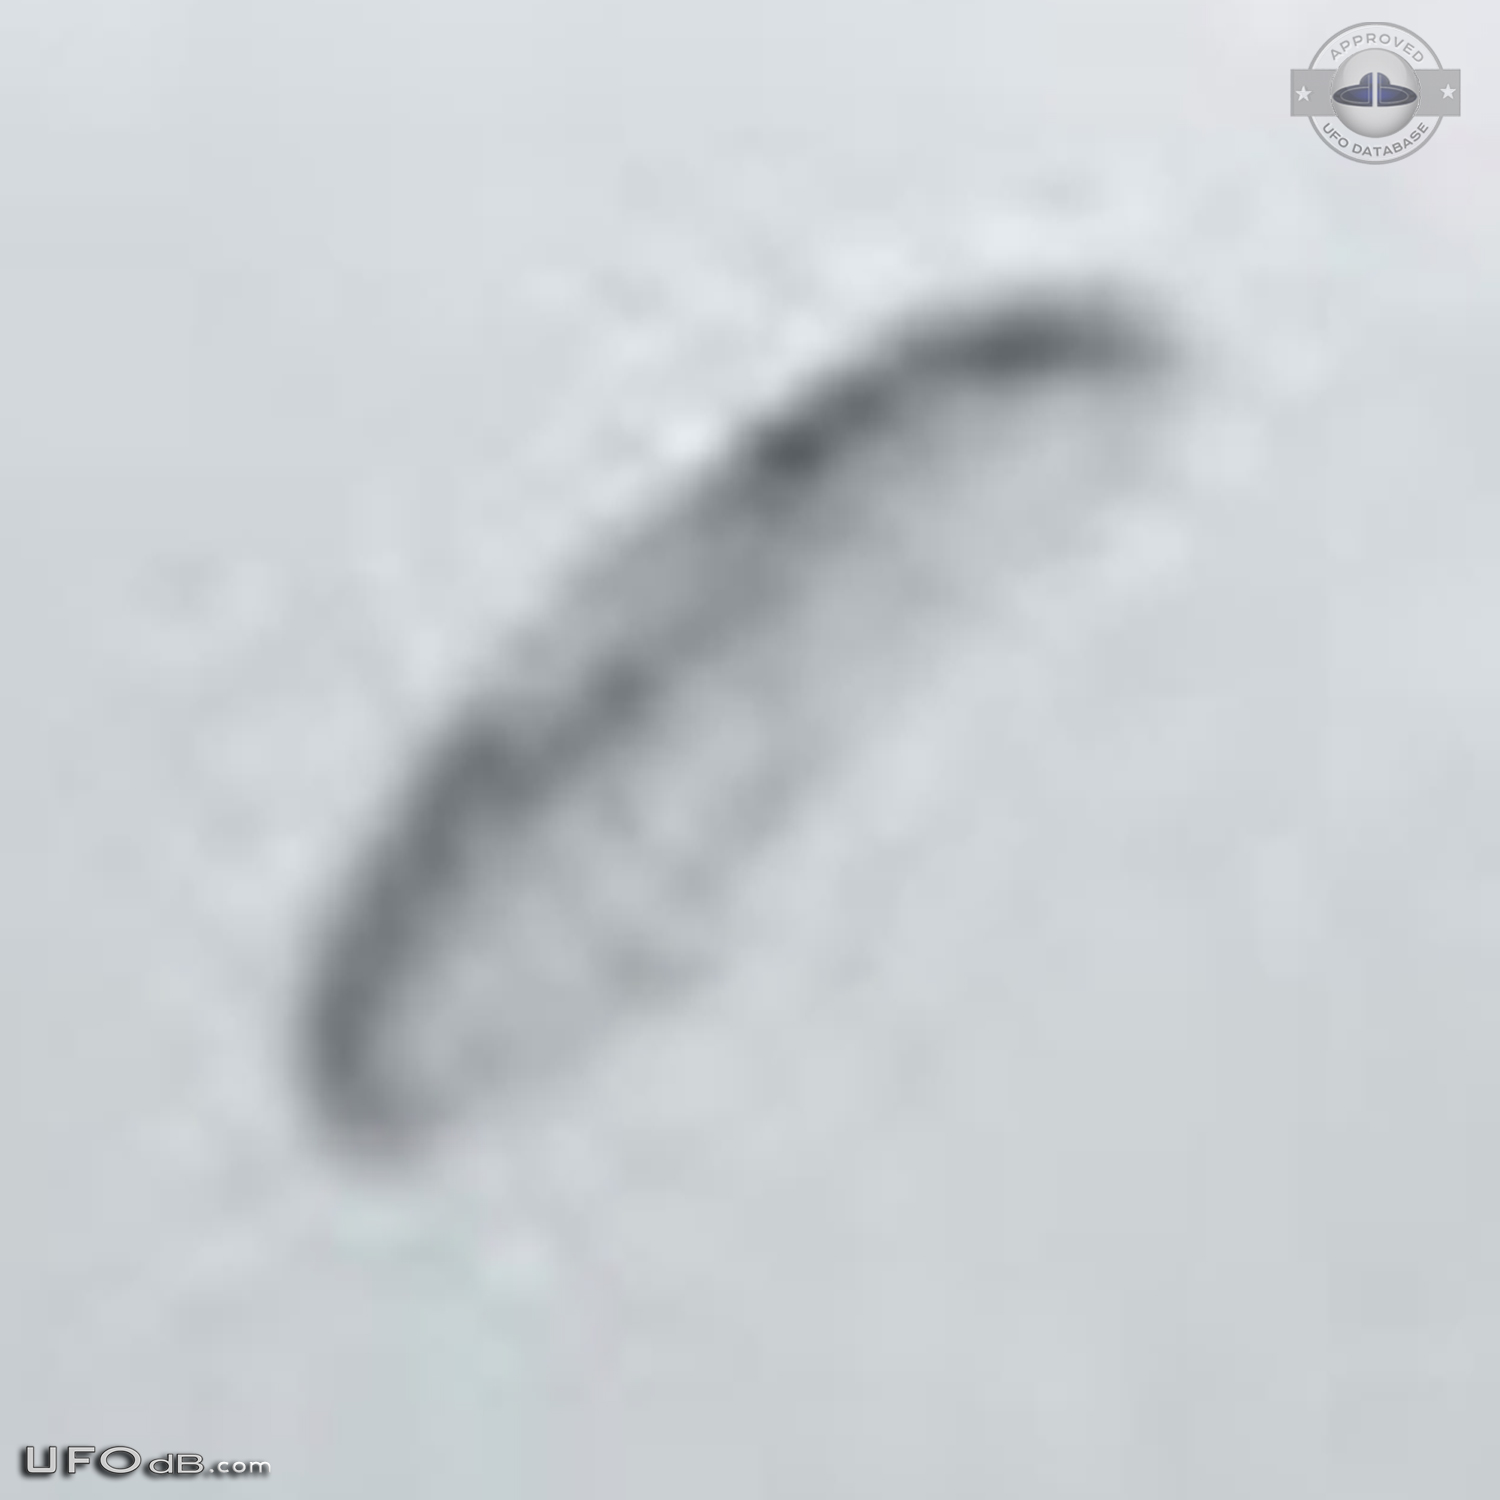 Parachute shaped UFO seen over Claromeco, Tres Arroyos Argentina UFO Picture #620-5